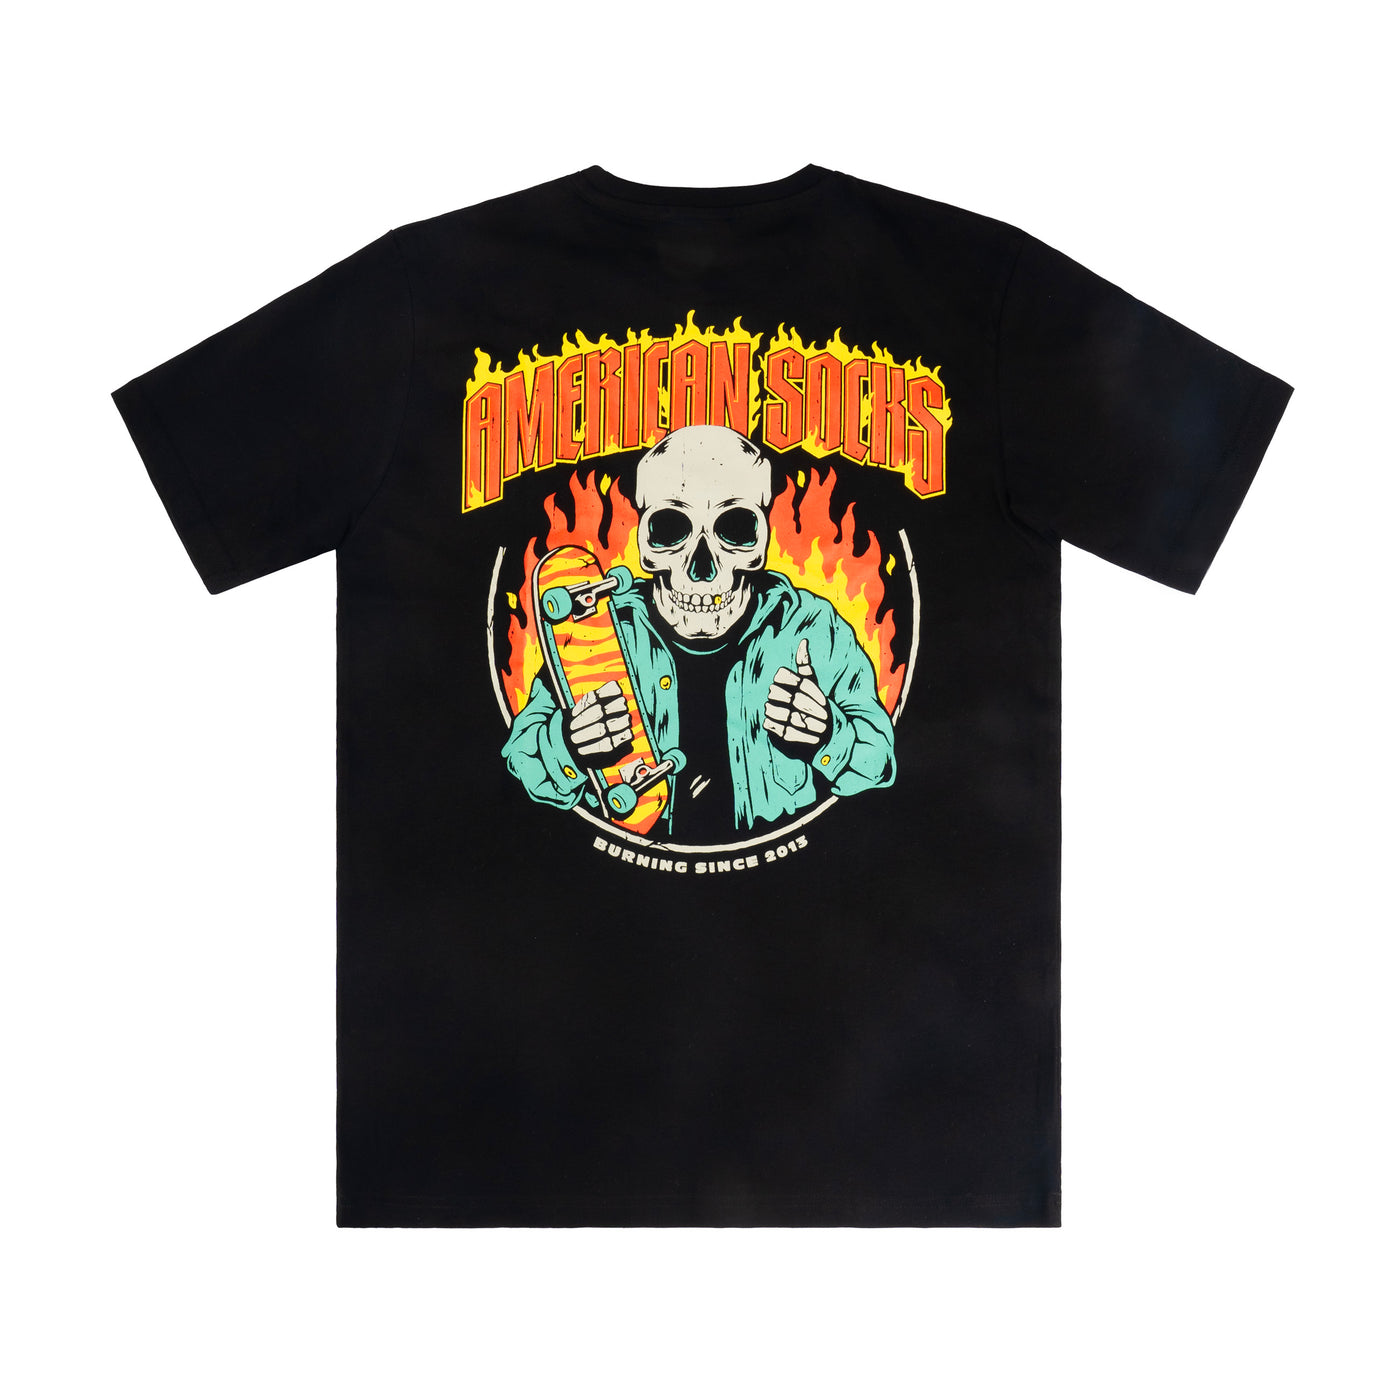 Welcome to Hell - Tシャツ